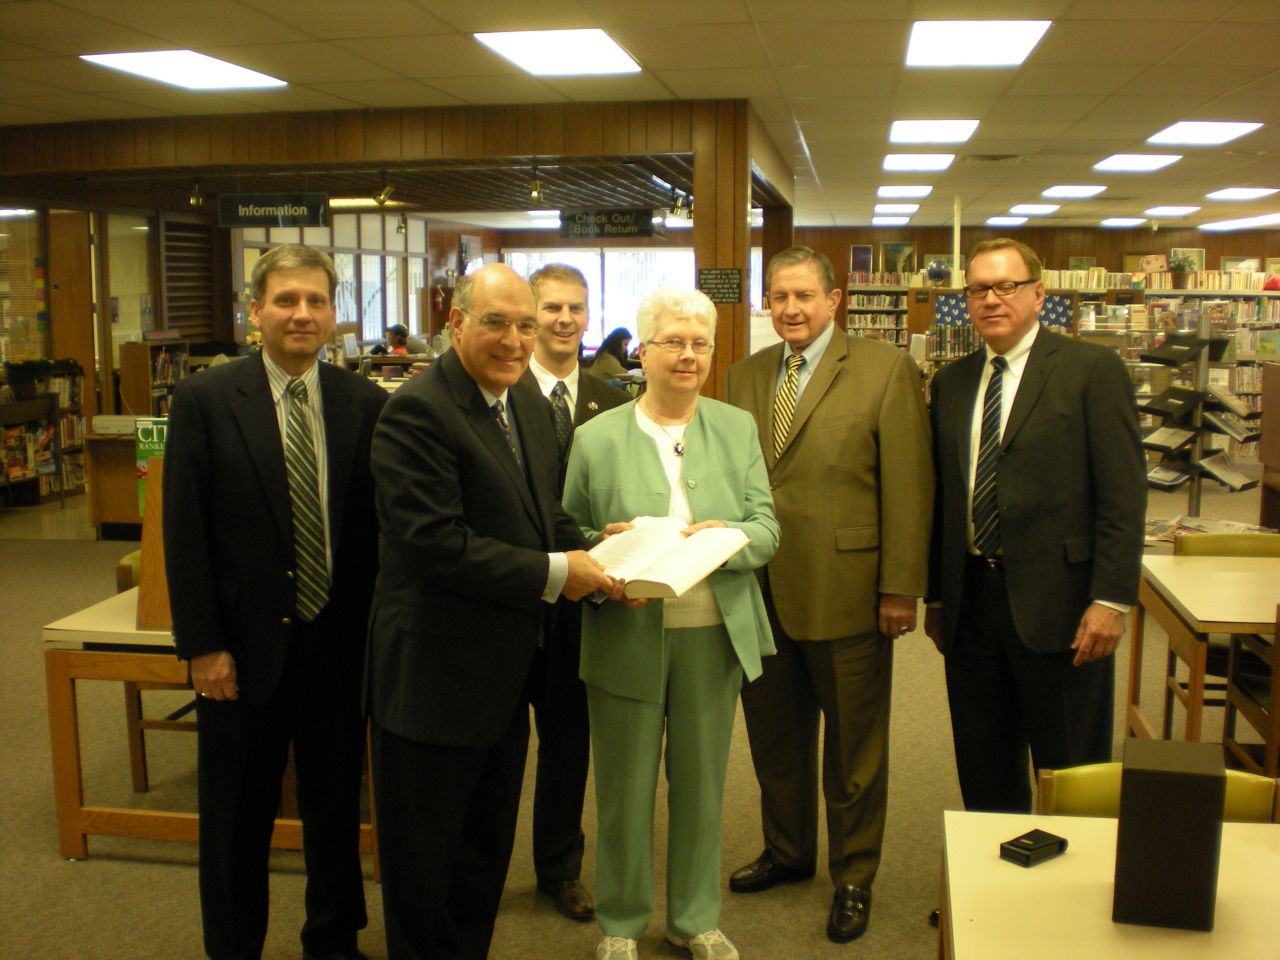 ISBA President-elect Mark Hassakis (second from left) presented the four-volume set to the Mt. Carmel Public Library on March 17 as a gift from the ISBA and its charitable arm, the Illinois Bar Foundation. Accepting the books is library director Louise Taylor.  On hand for the presentation were local attorneys (from left) John P. Farrar, William C. Hudson, George Woodcock Jr., and John E. Rhine.